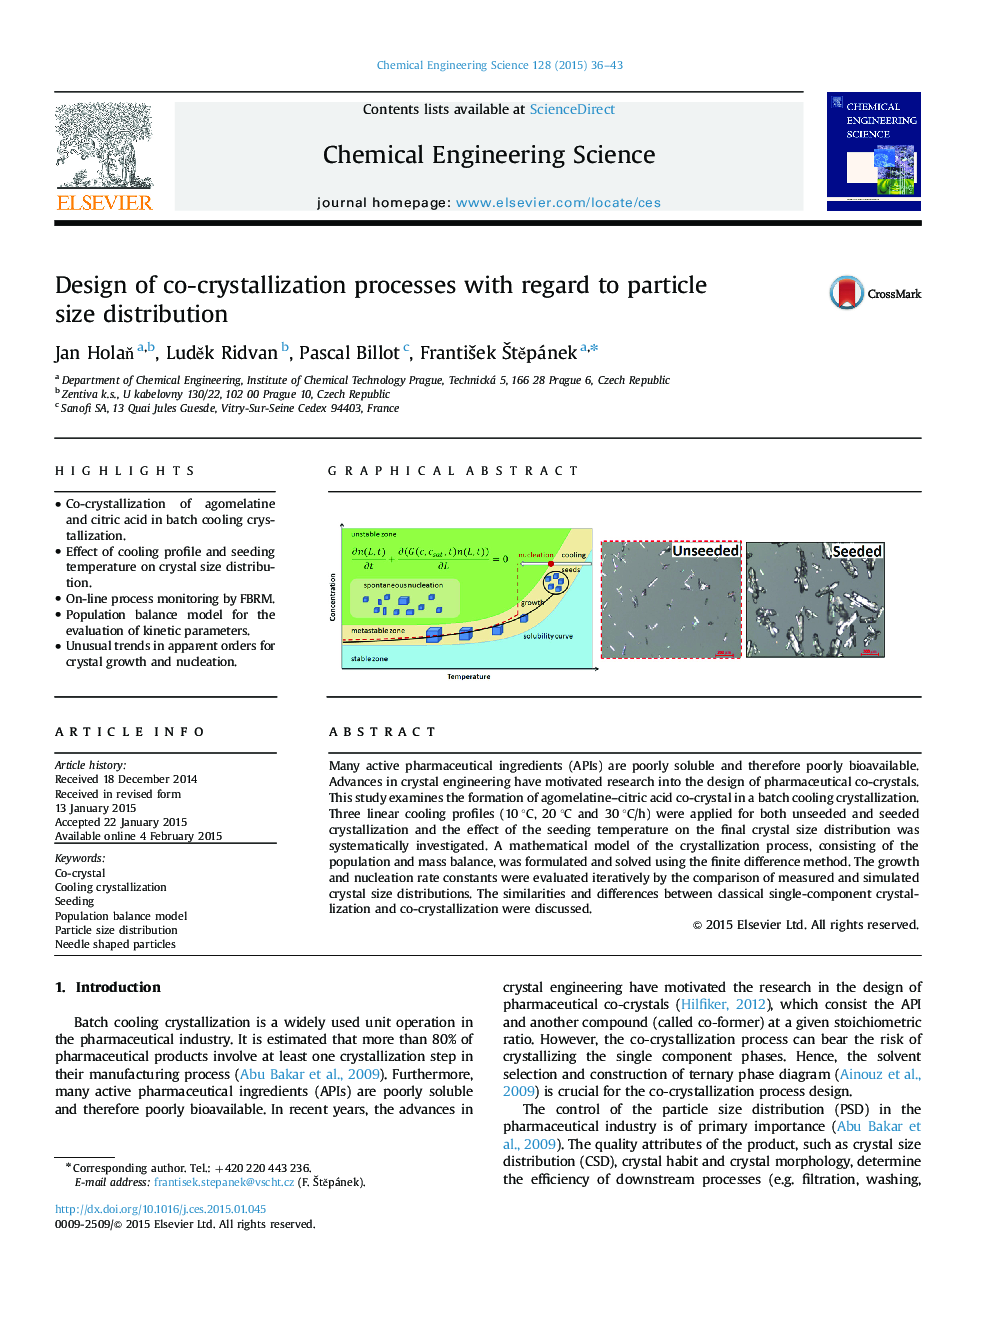 Design of co-crystallization processes with regard to particle size distribution